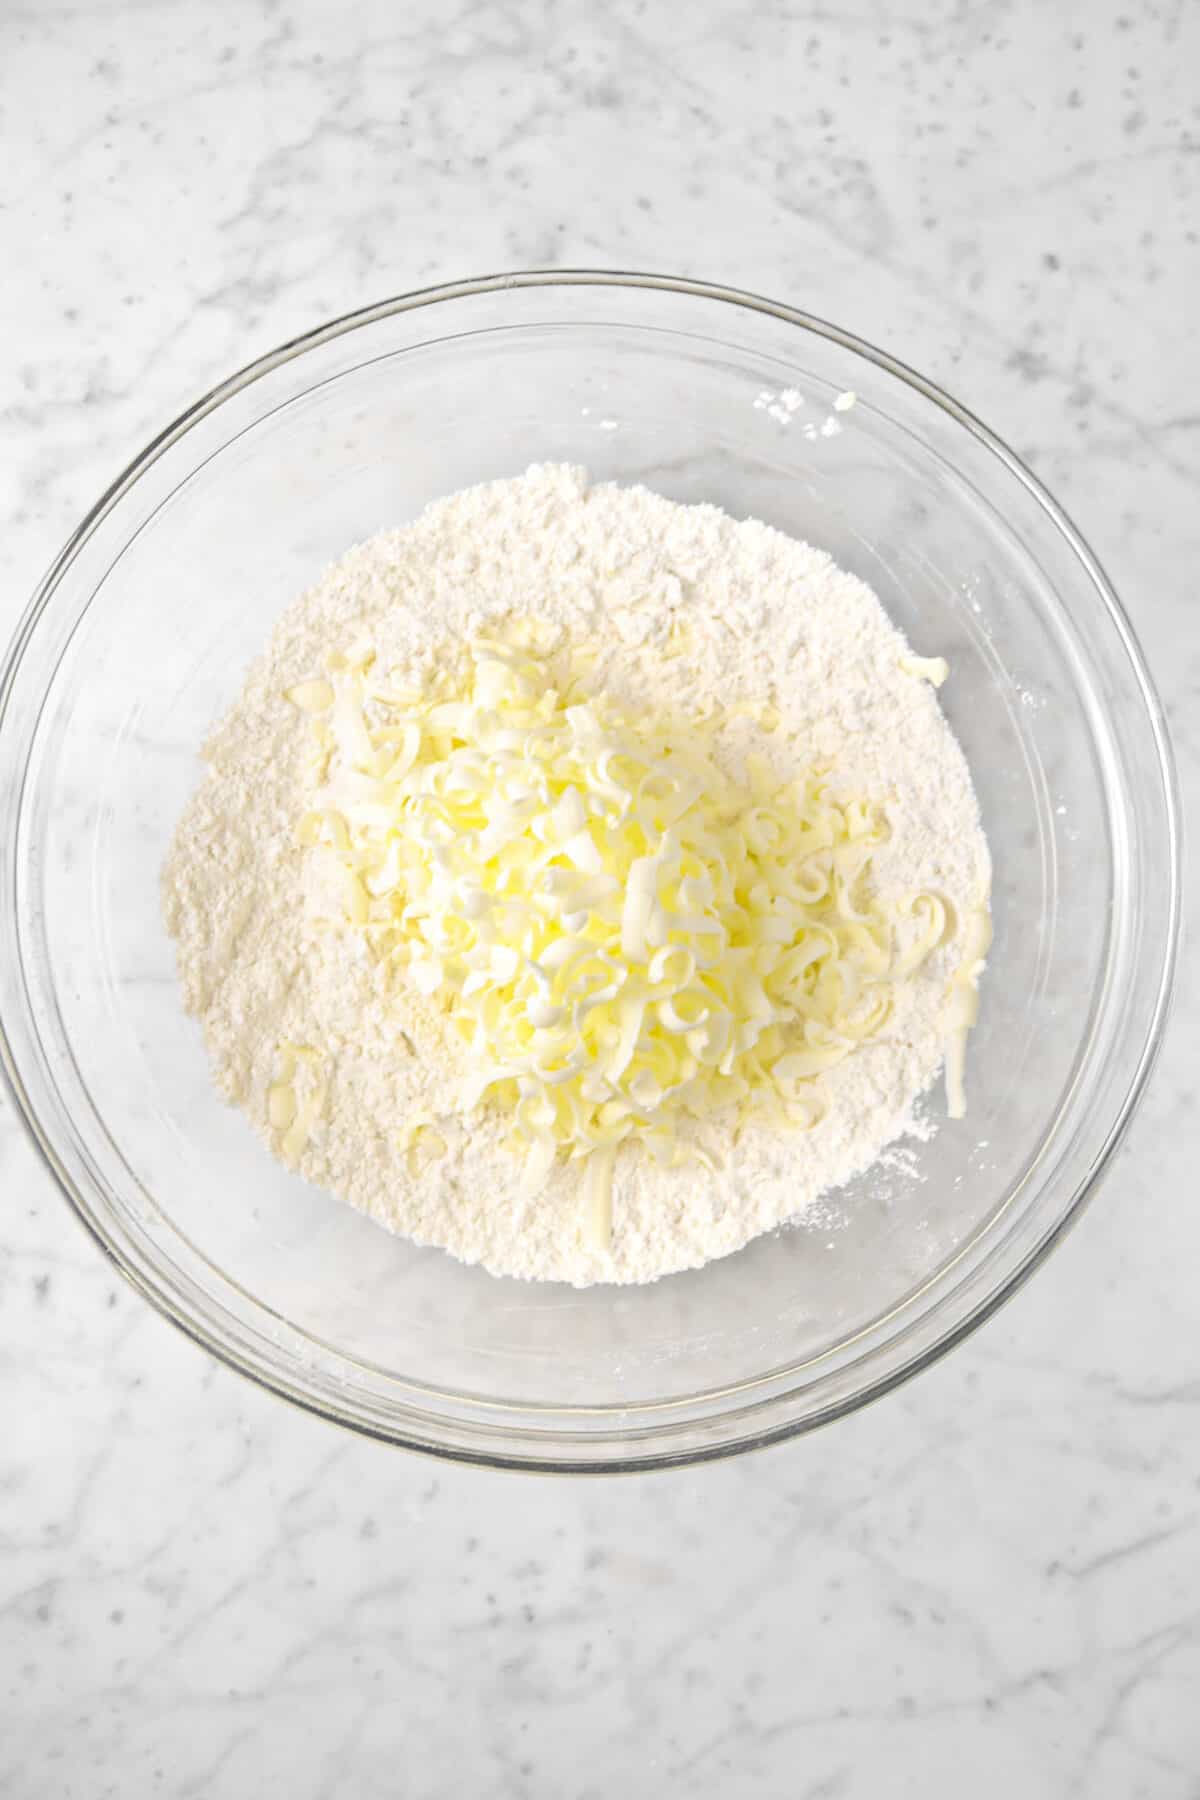 butter grated into flour mixture